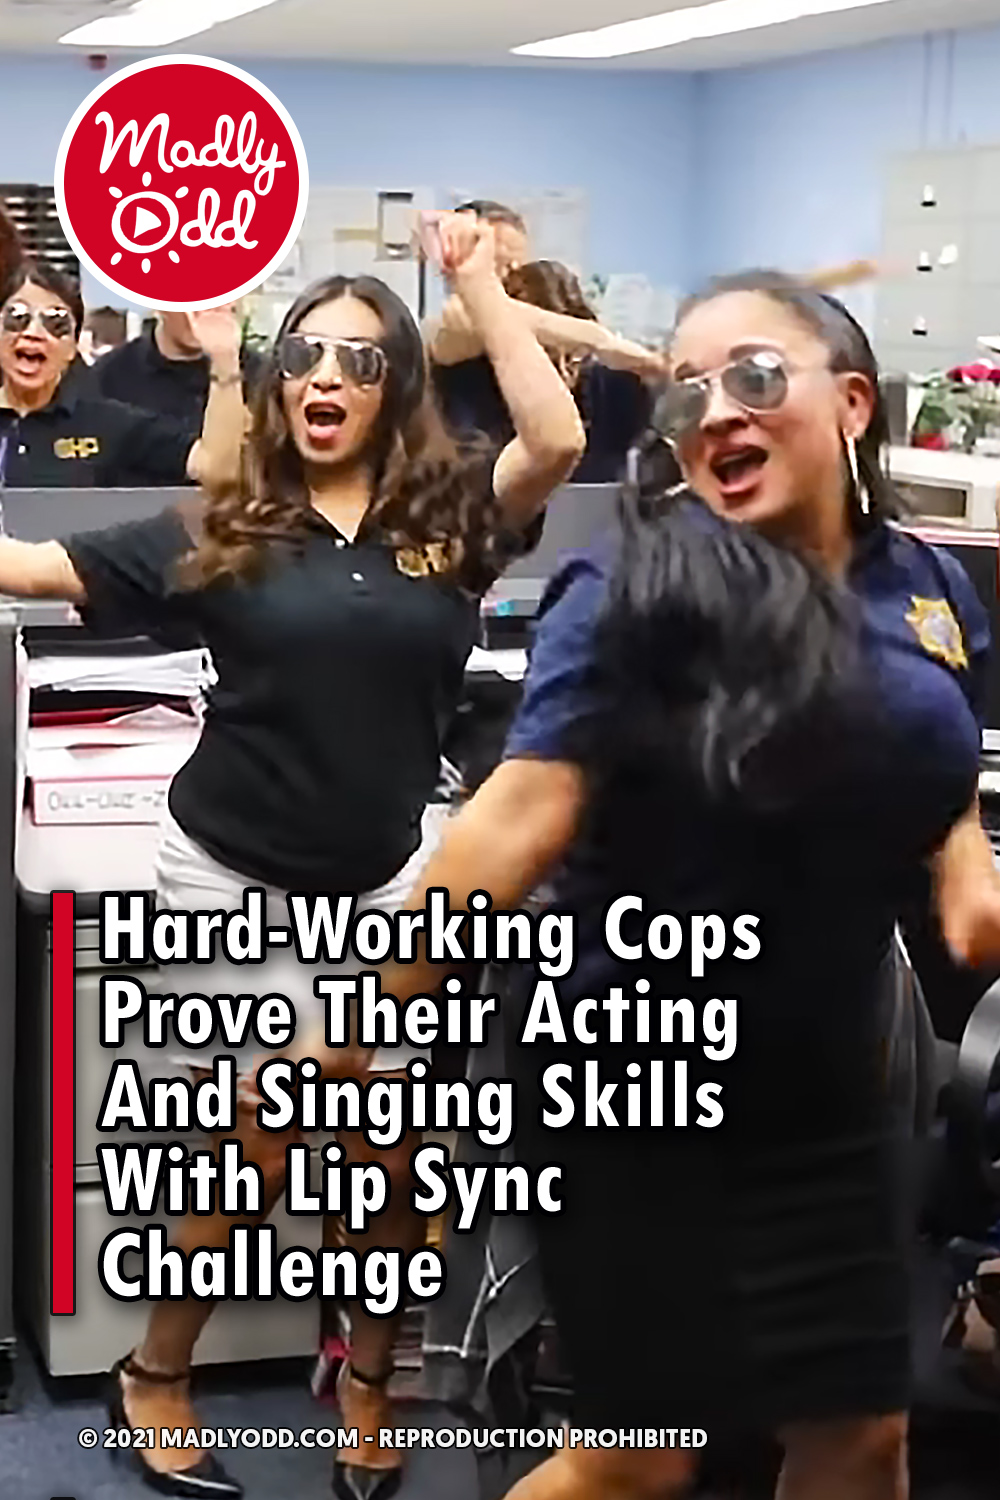 Hard-Working Cops Prove Their Acting And Singing Skills With Lip Sync Challenge